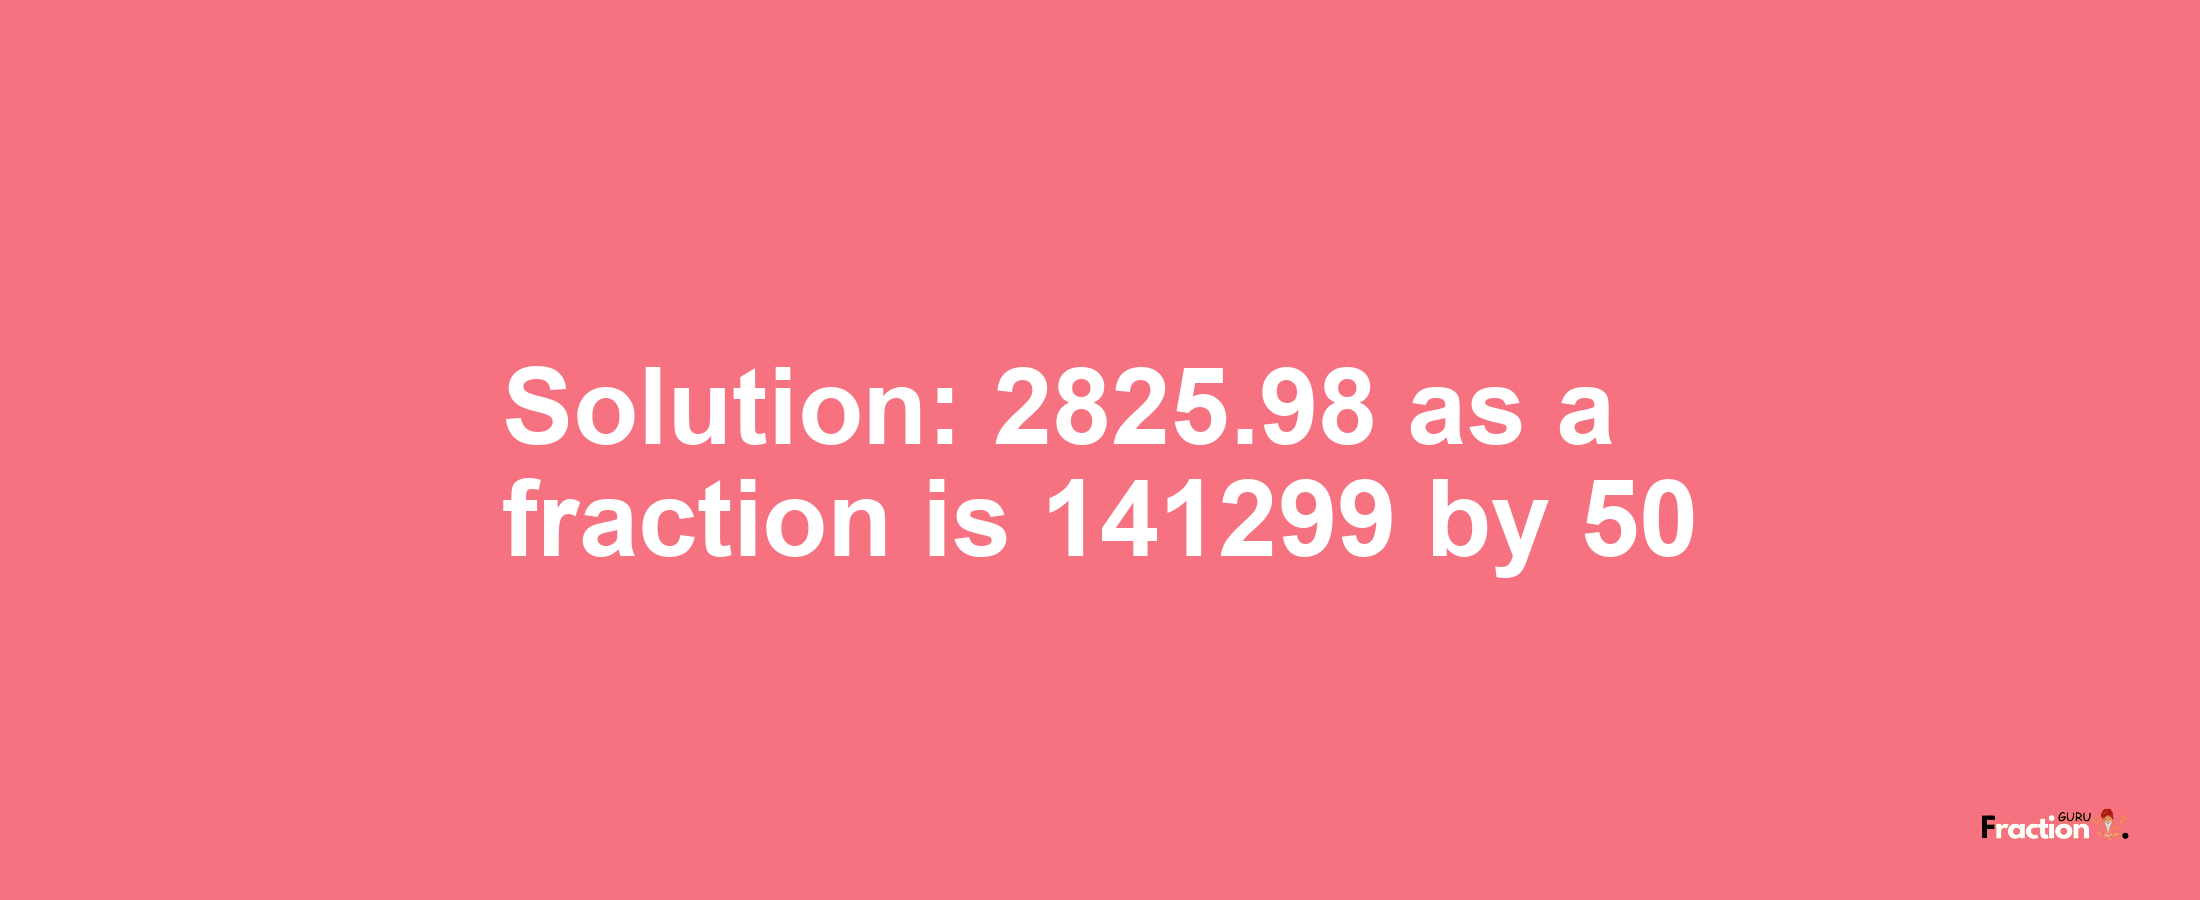 Solution:2825.98 as a fraction is 141299/50